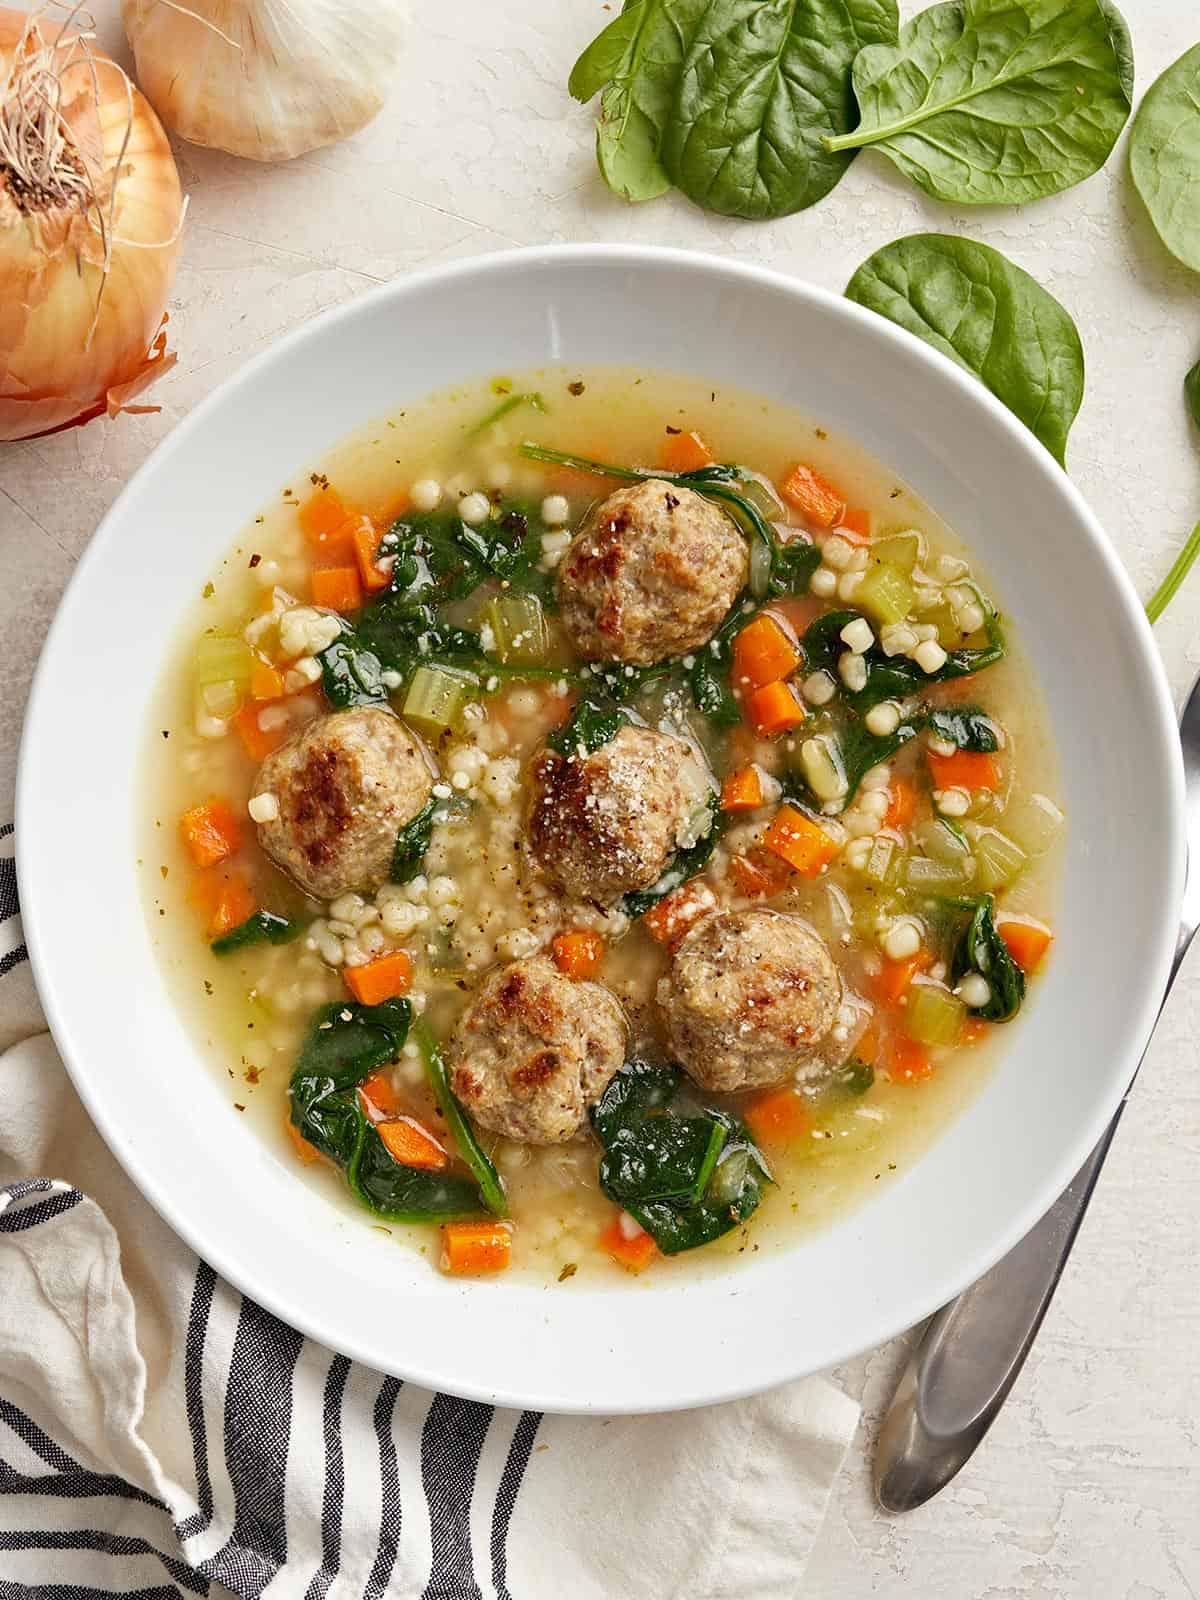 Overhead view of a bowl full of Italian Wedding Soup with bread on the side.